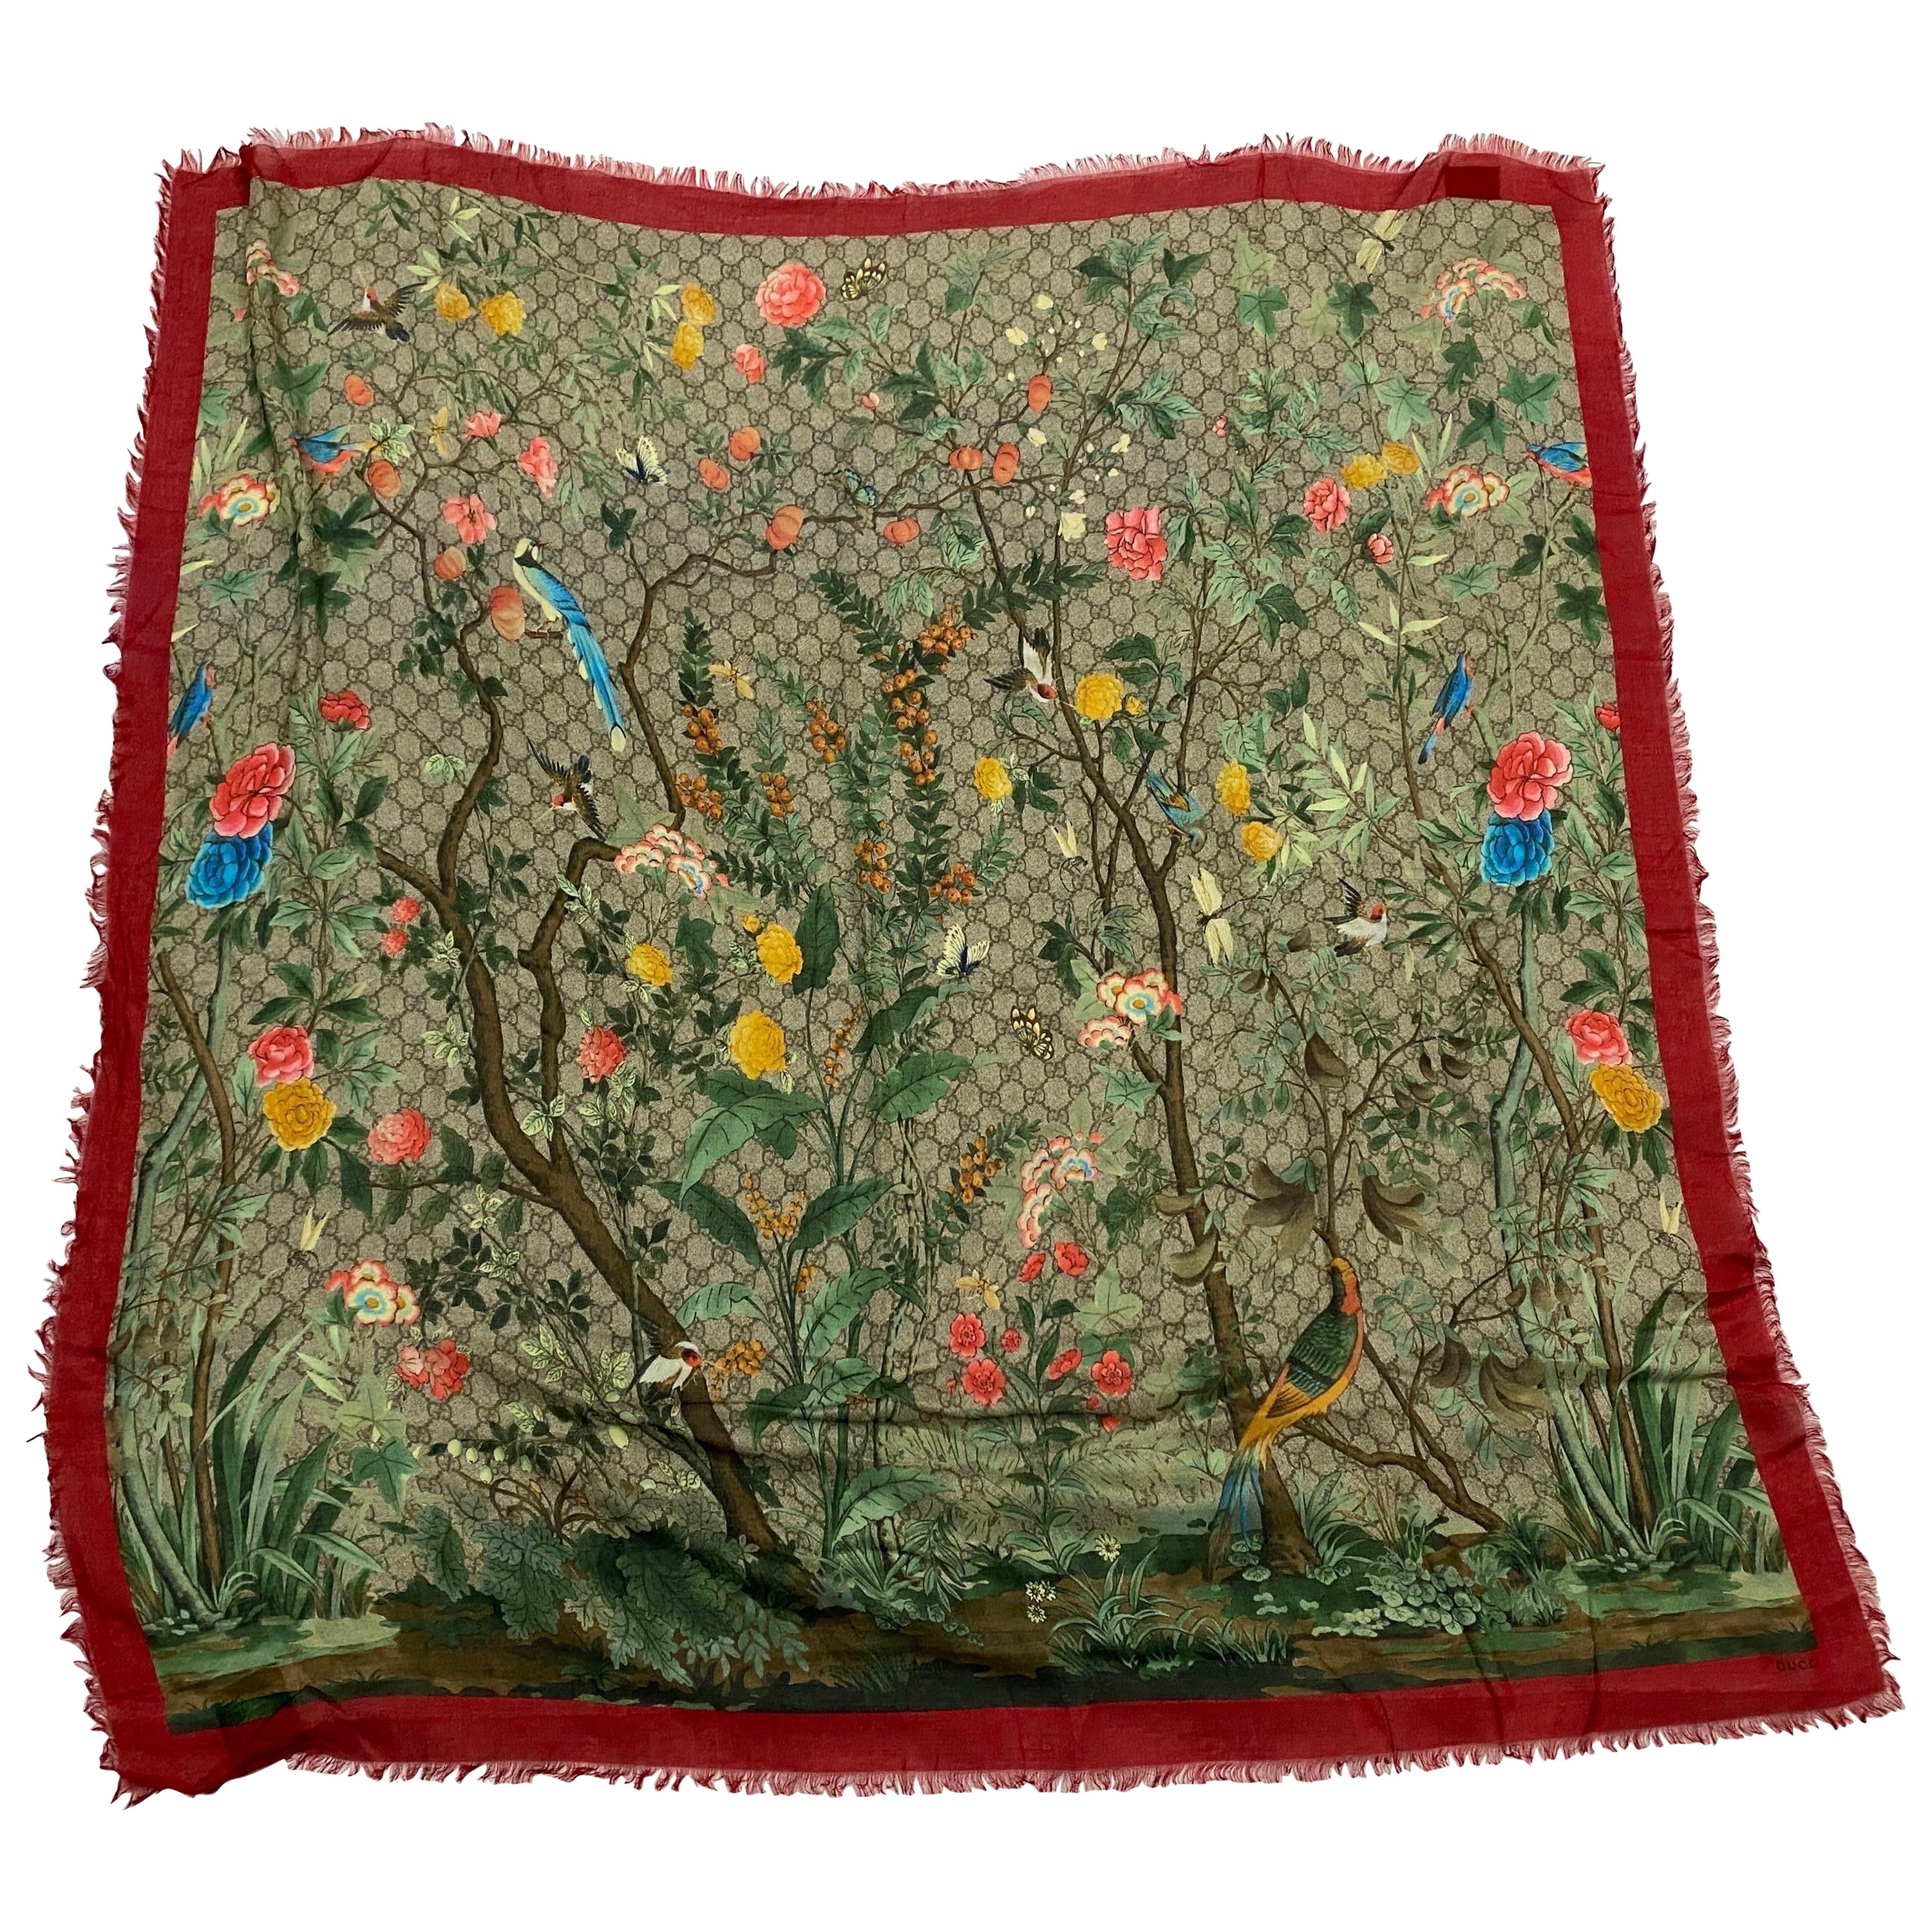 An Iconic Wool and Silk Flora and Fauna Italian Scarf by Gucci